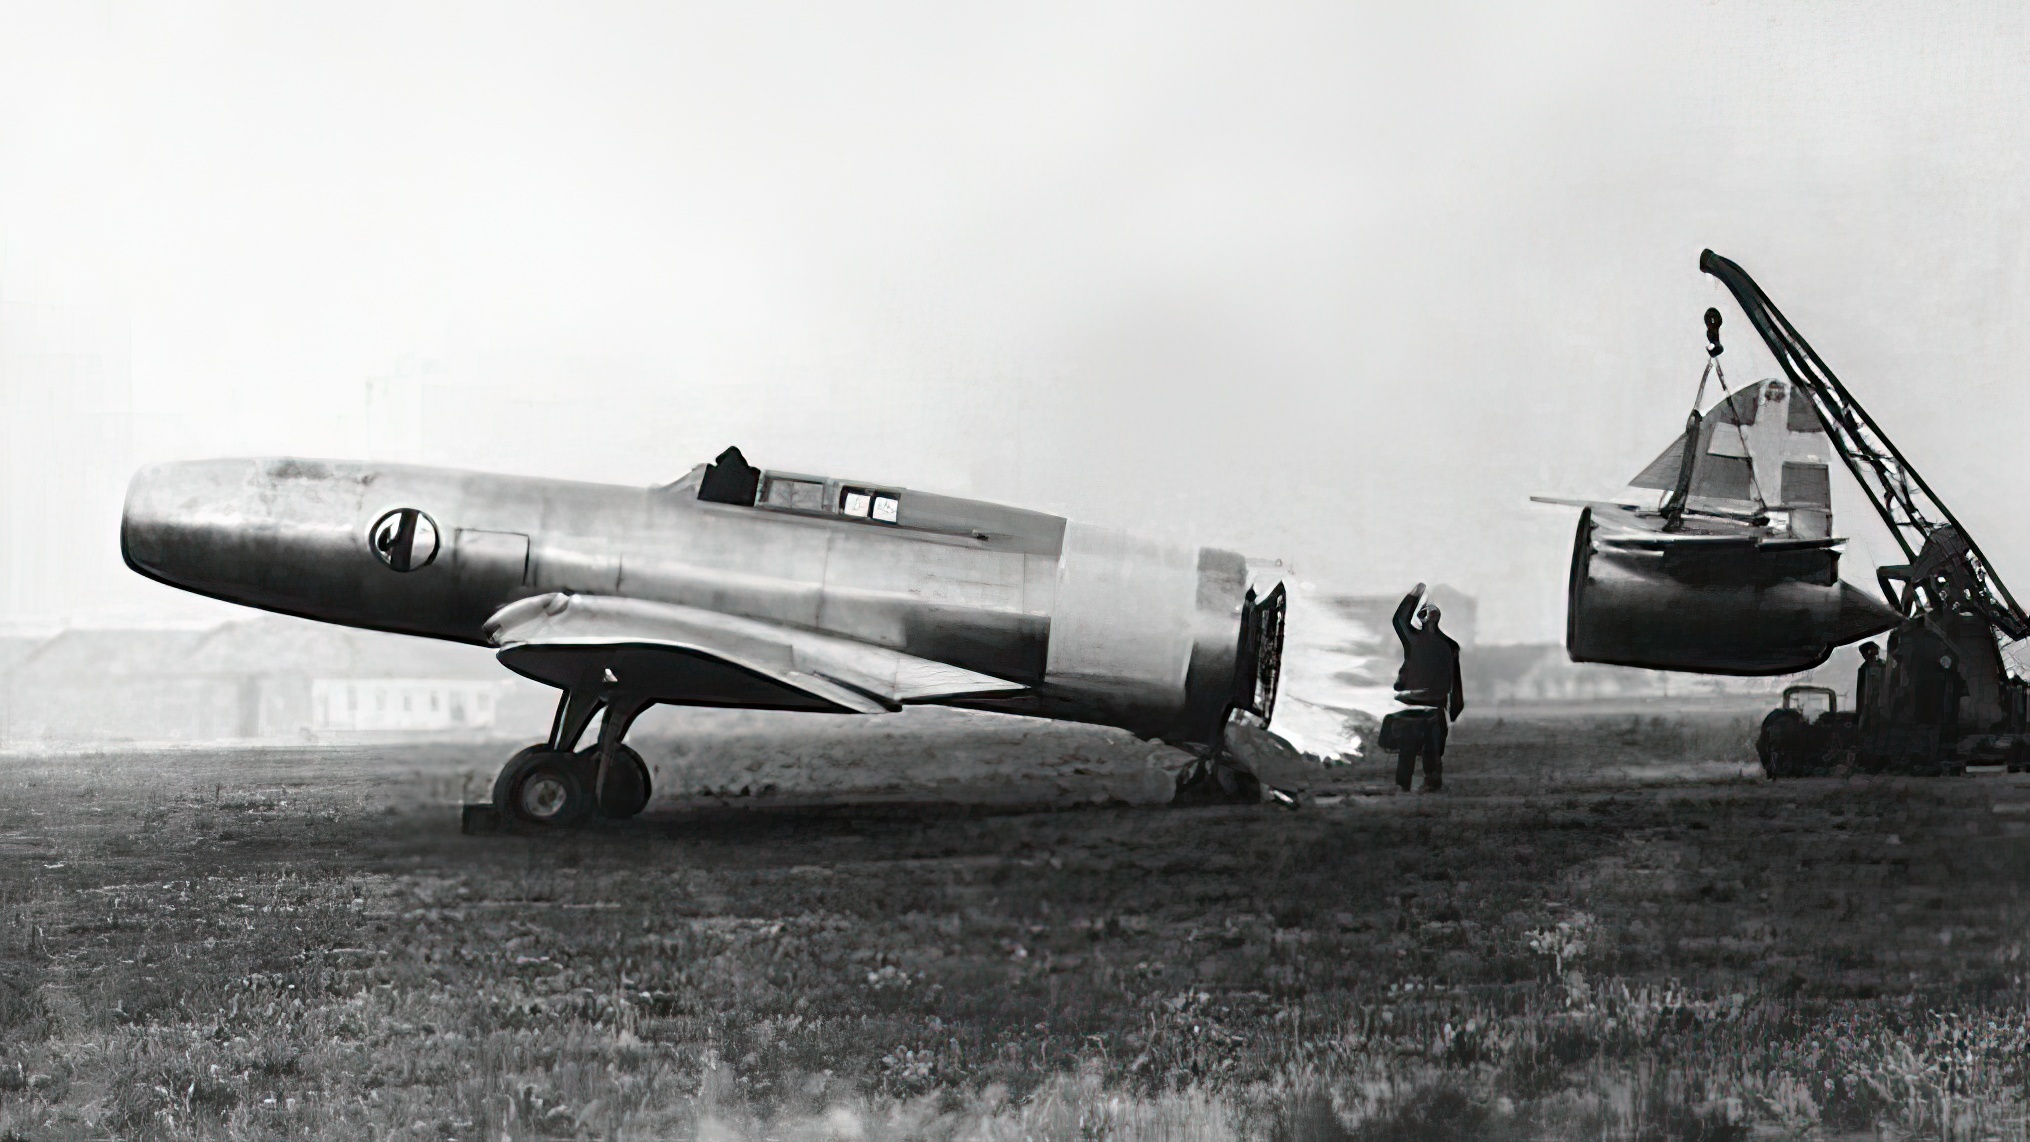 The C.C.2 during a ground test, with the tail section removed. Note the lit burner within the airflow from the compressor